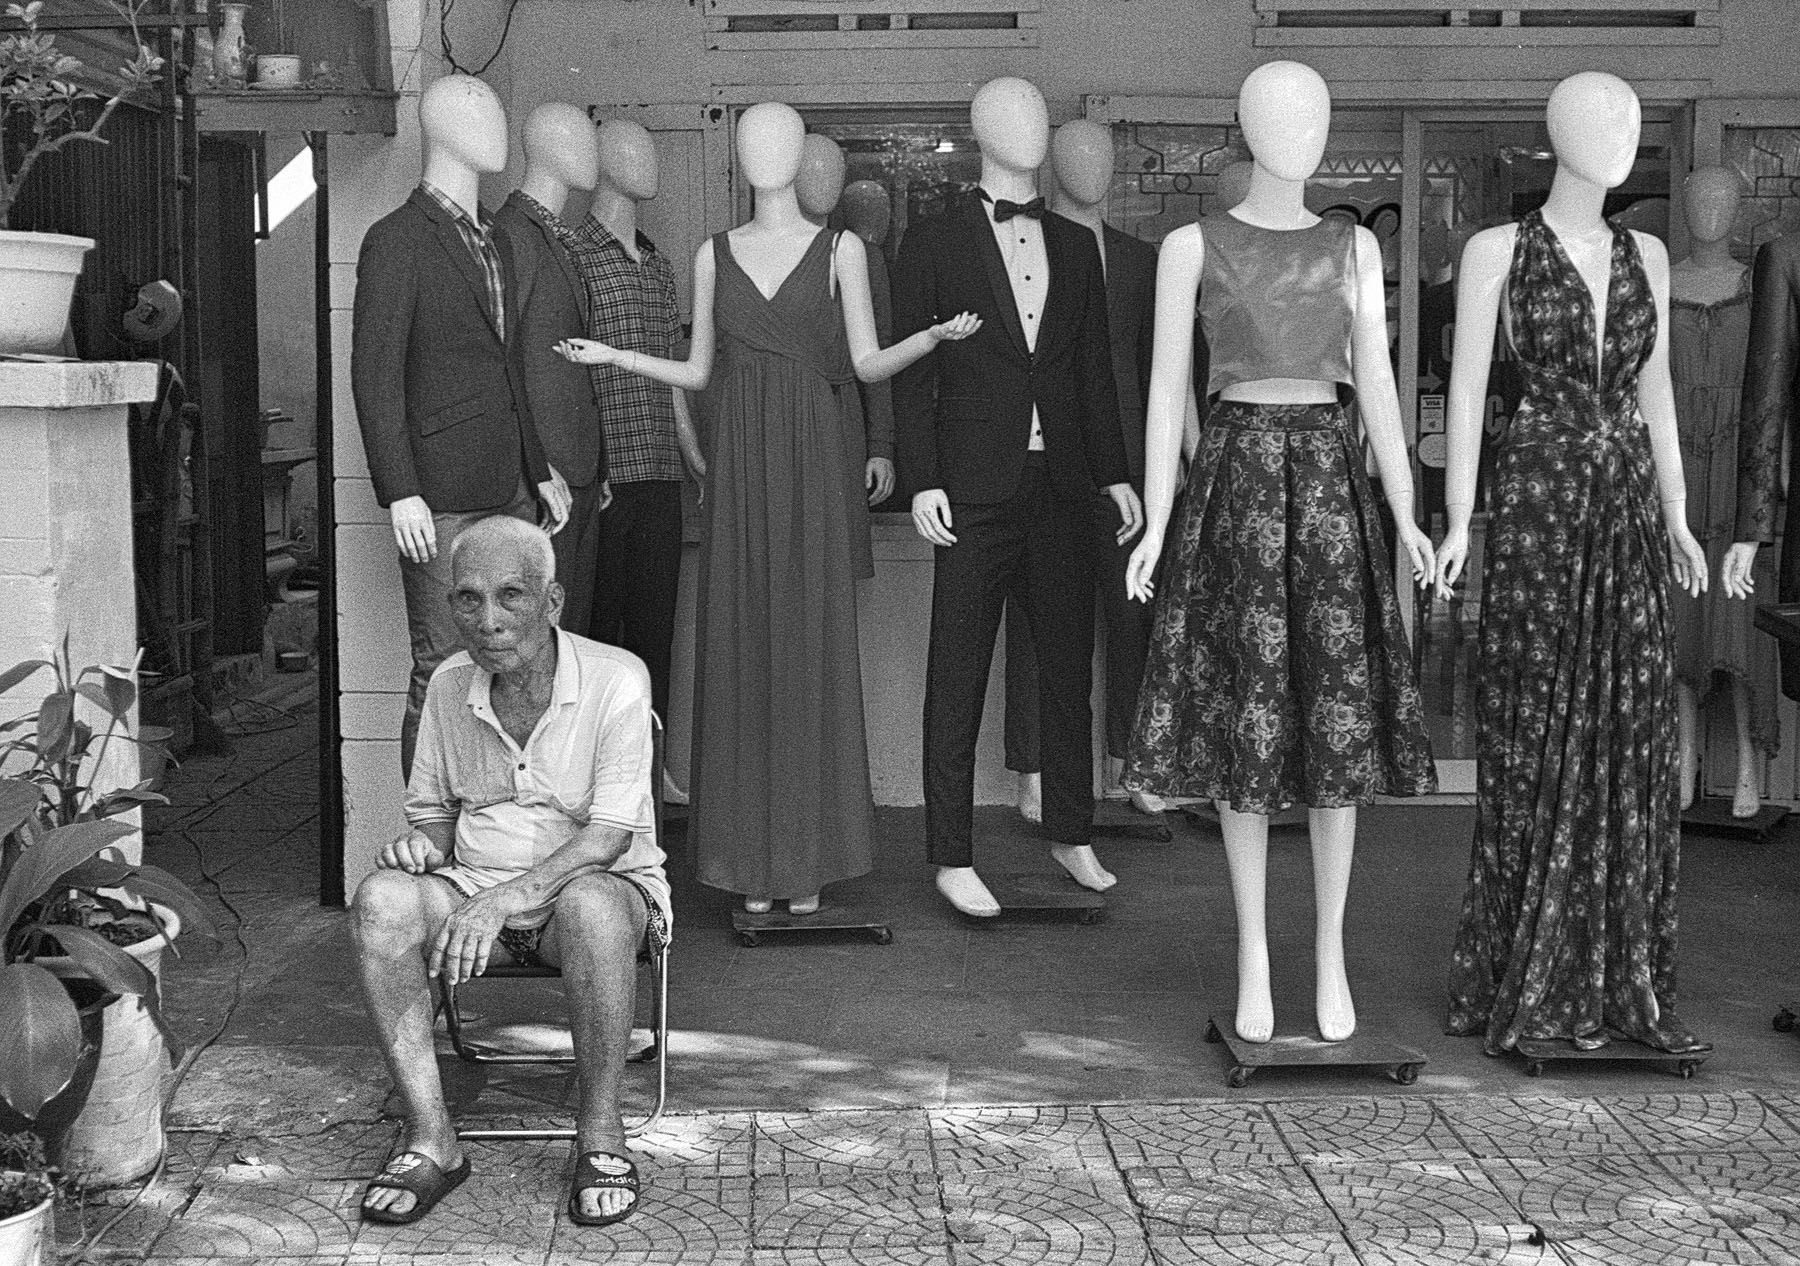 Old man in front of shop dummies (Pic: Lester Ledesma)